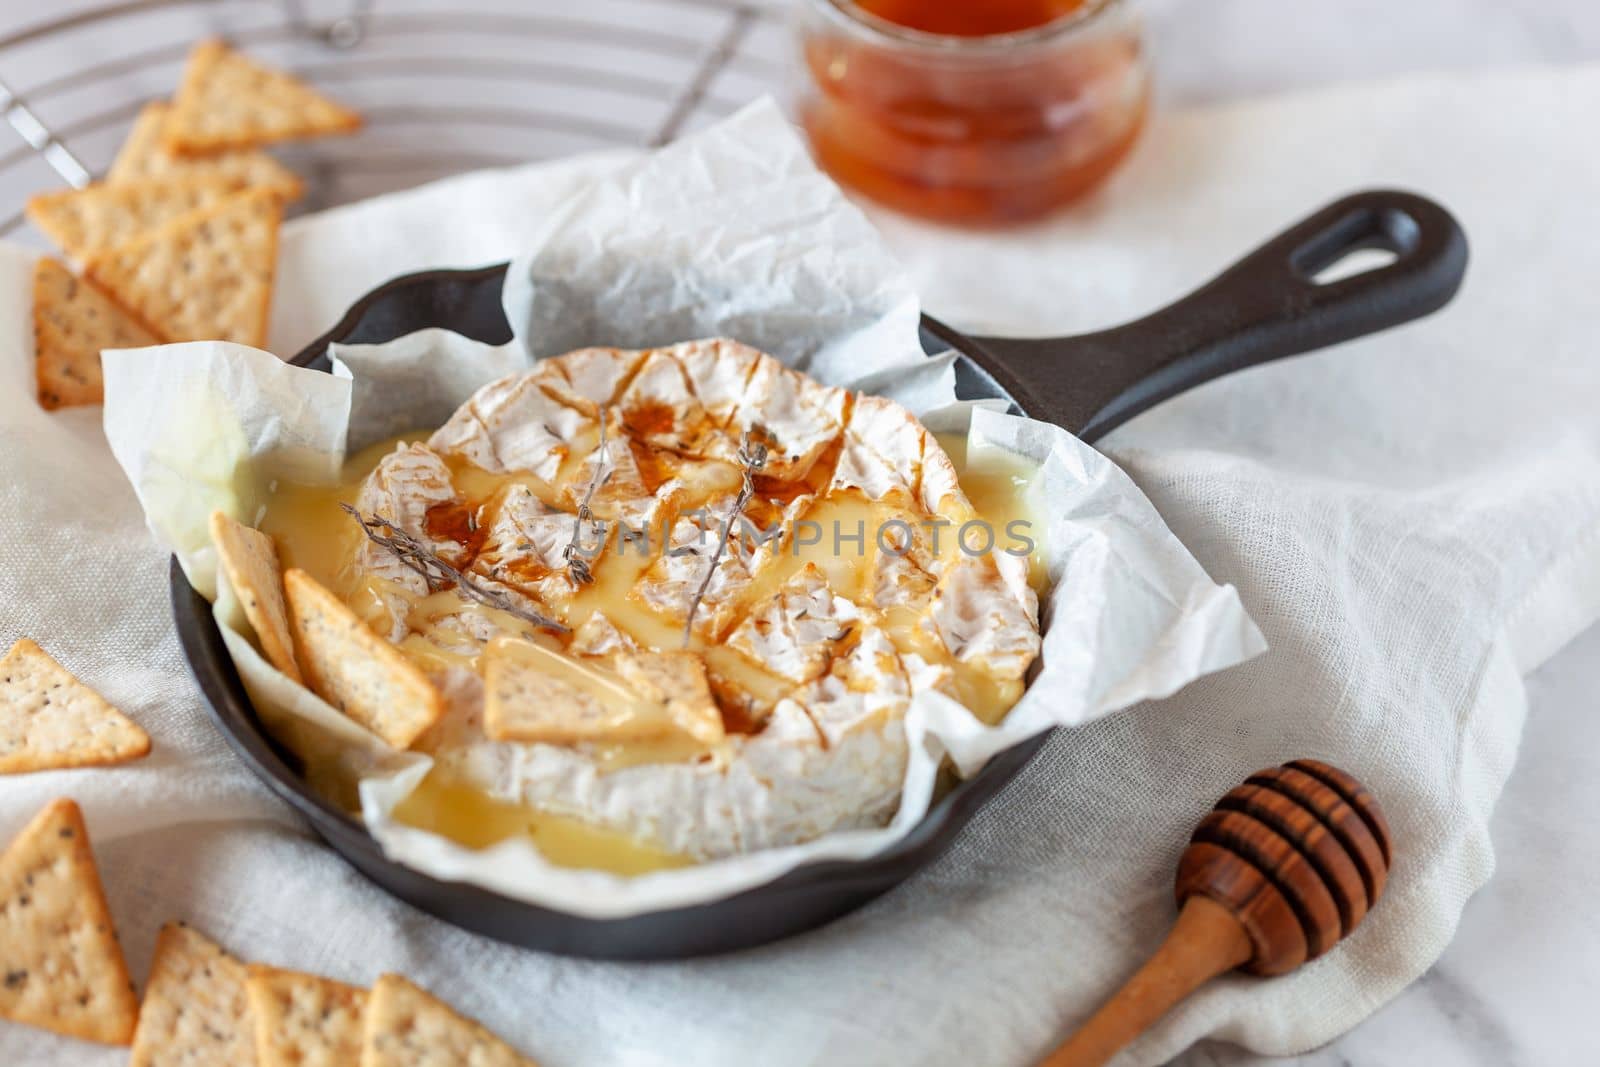 Camembert soft french cheese cooked in the oven with honey and thyme by lanych